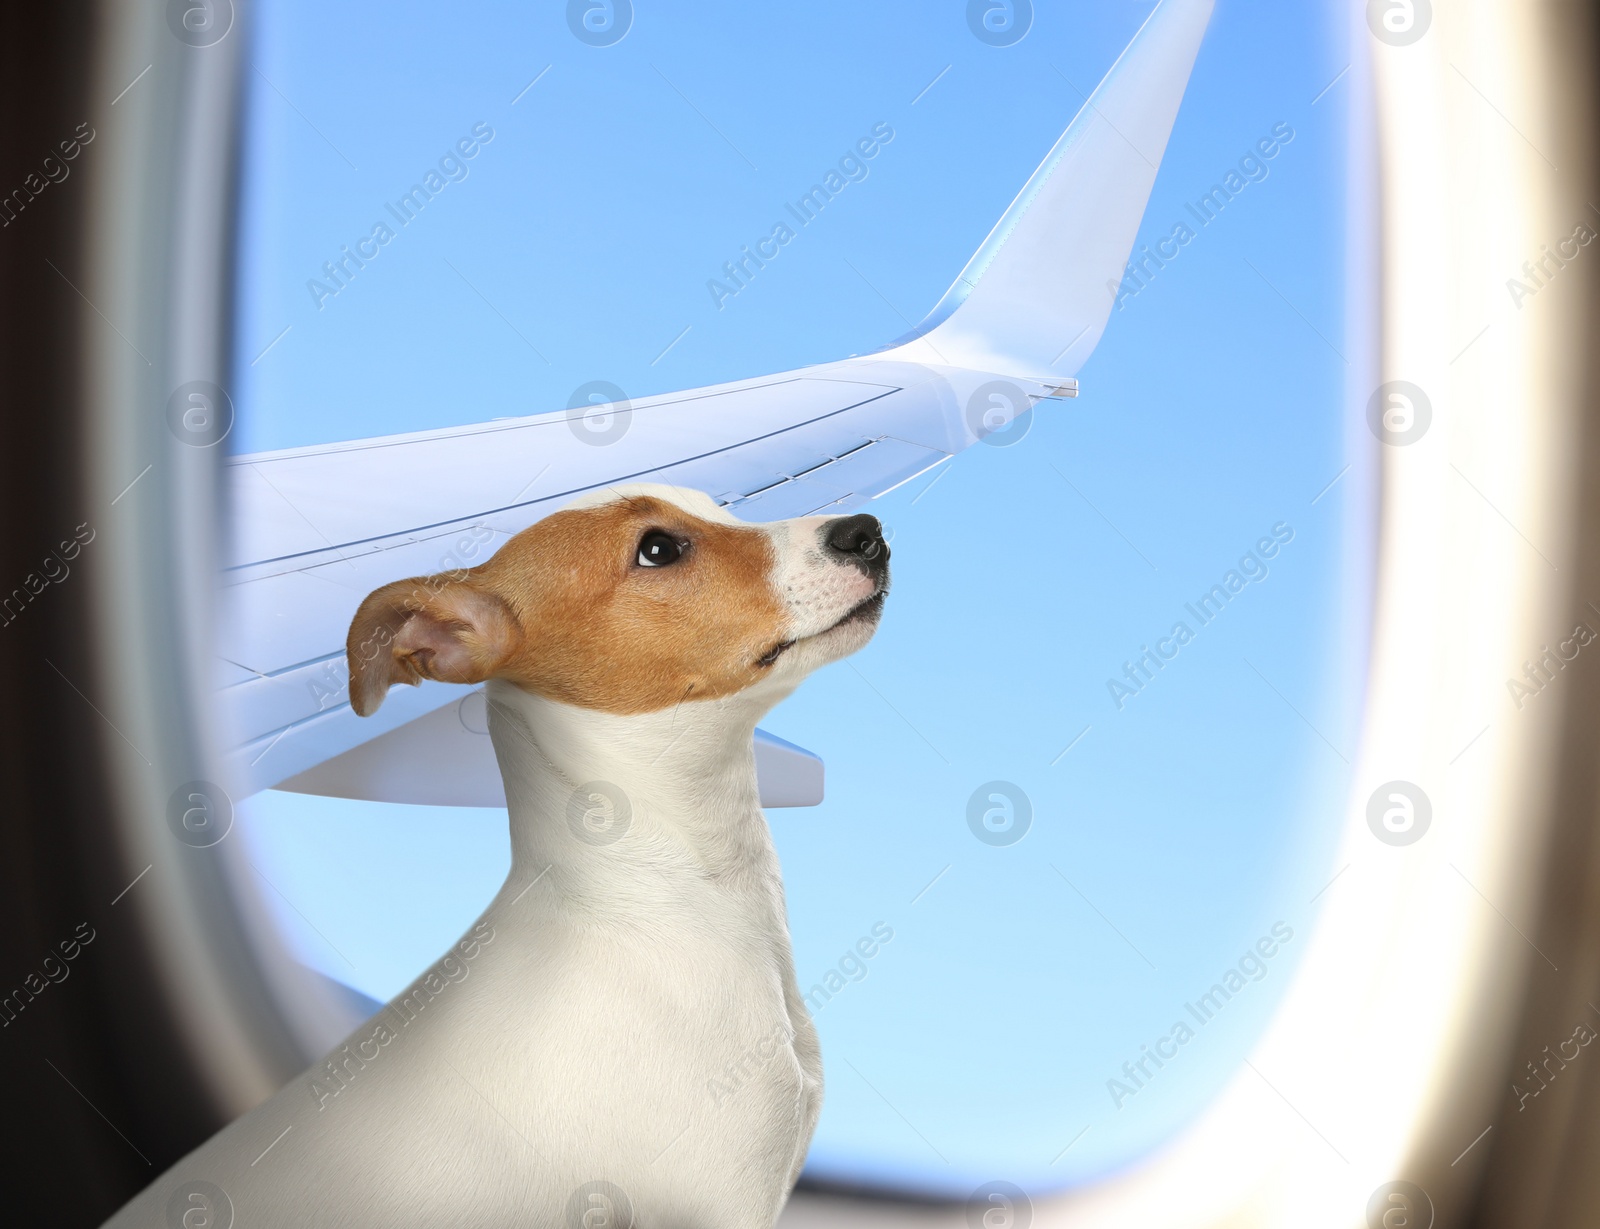 Image of Travelling with pet. Cute Jack Russel Terrier dog near window in airplane